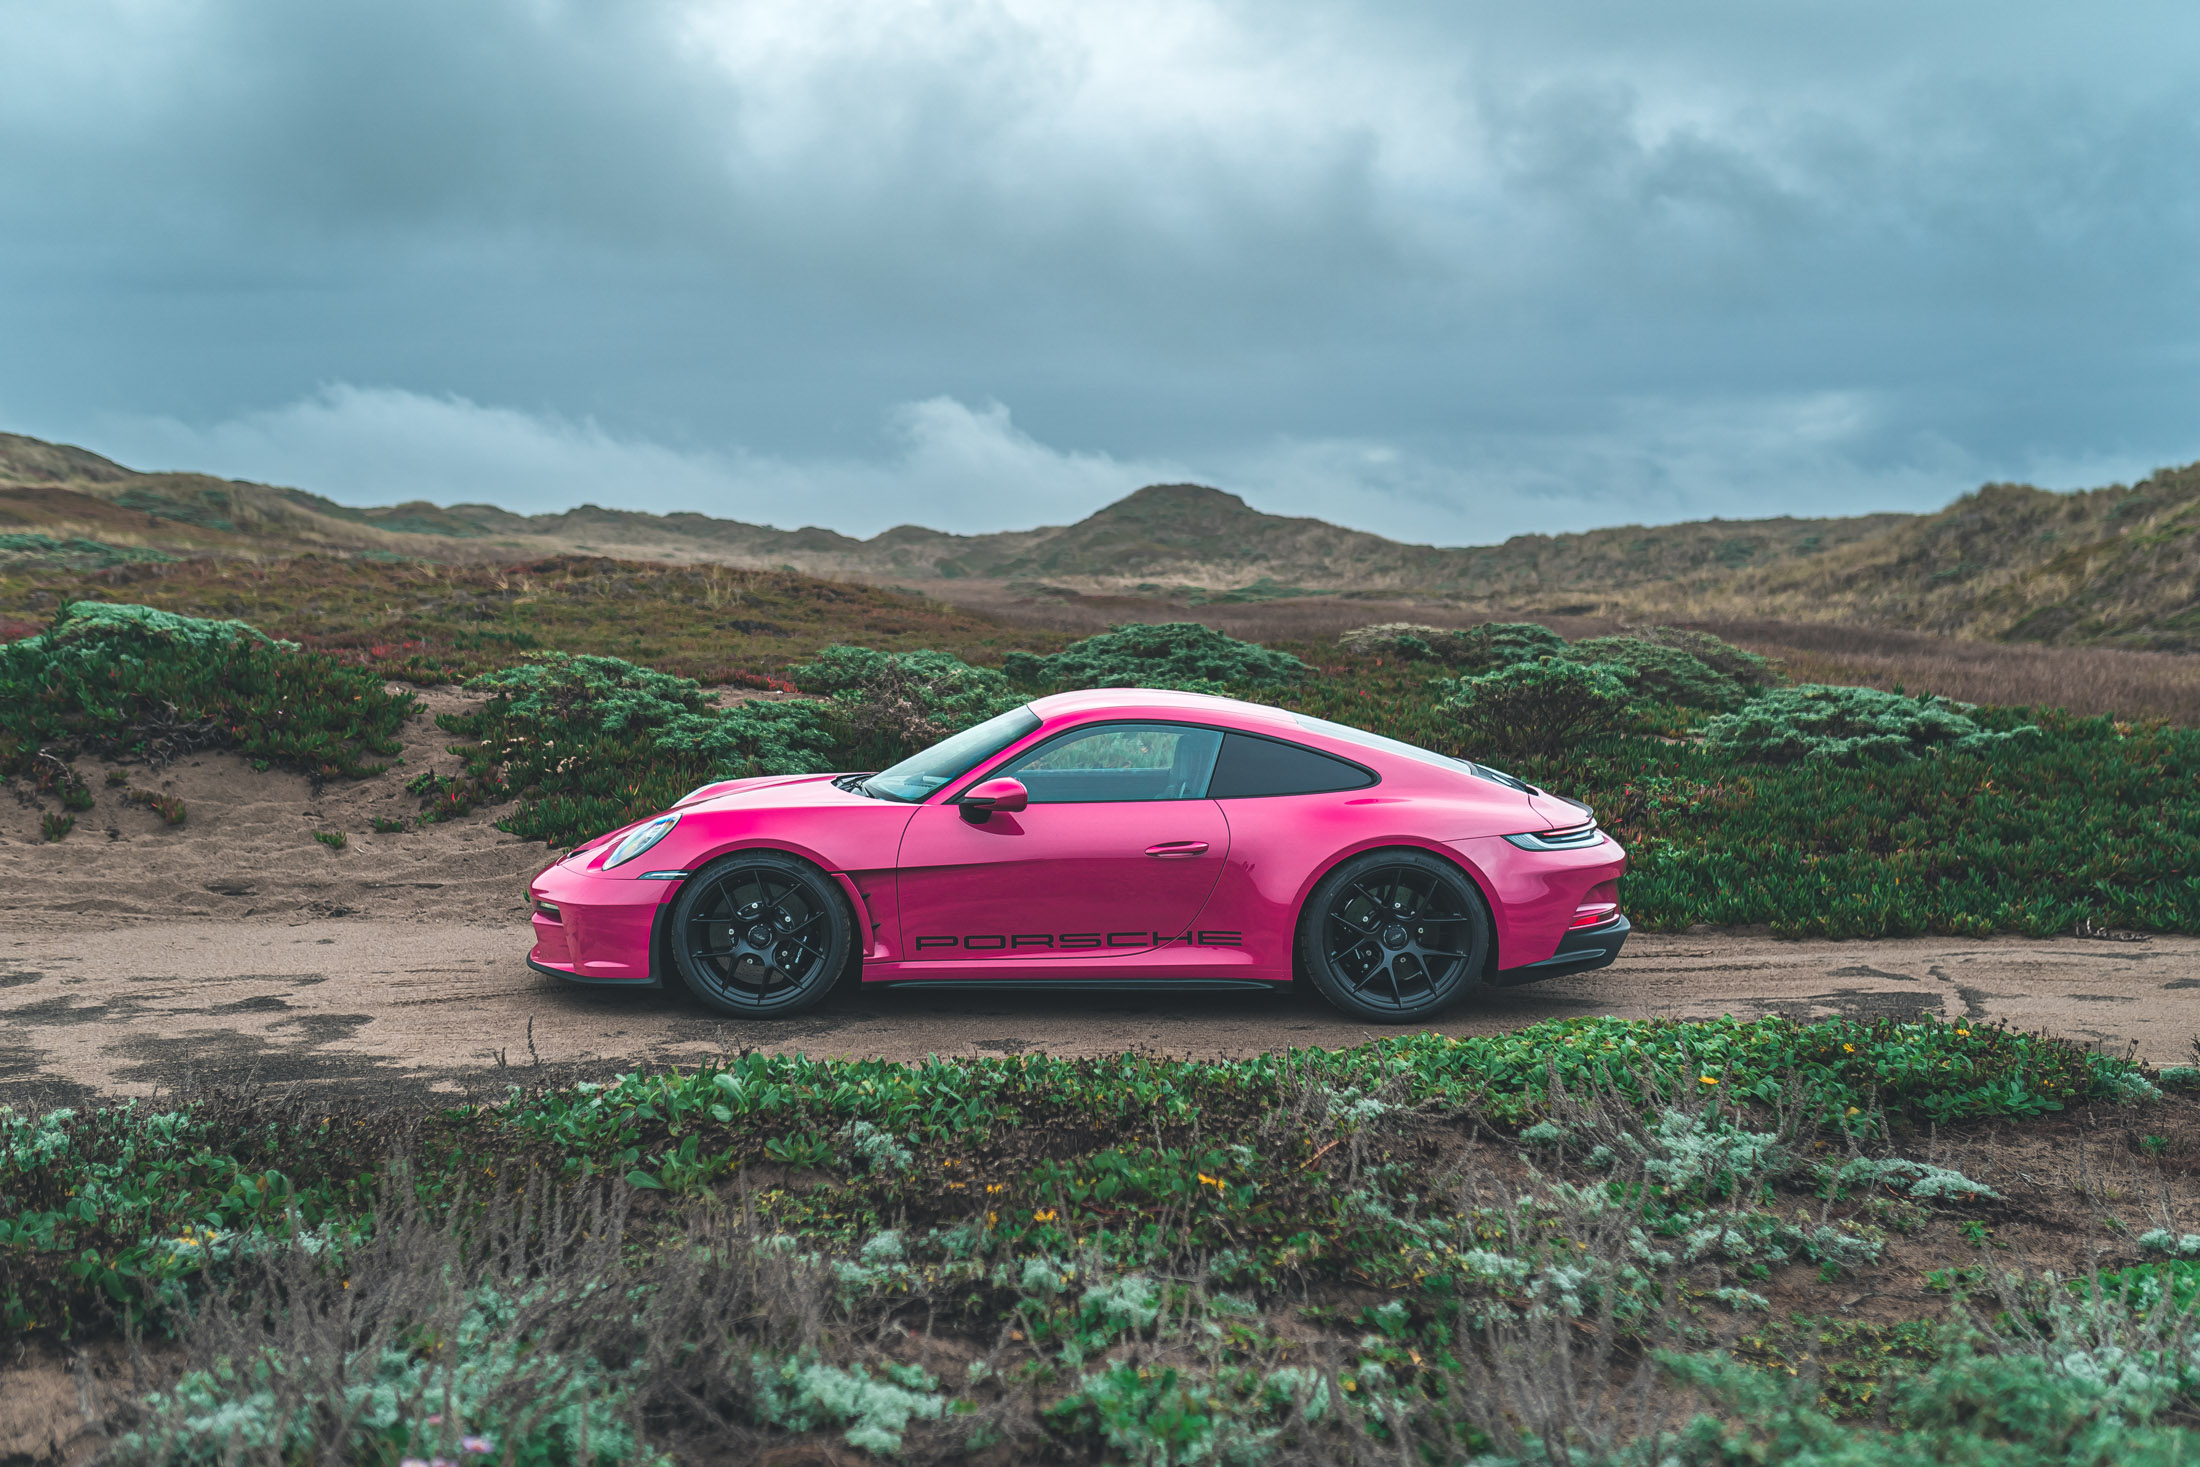 2024 Porsche 911 S/T Prices, Reviews, and Pictures